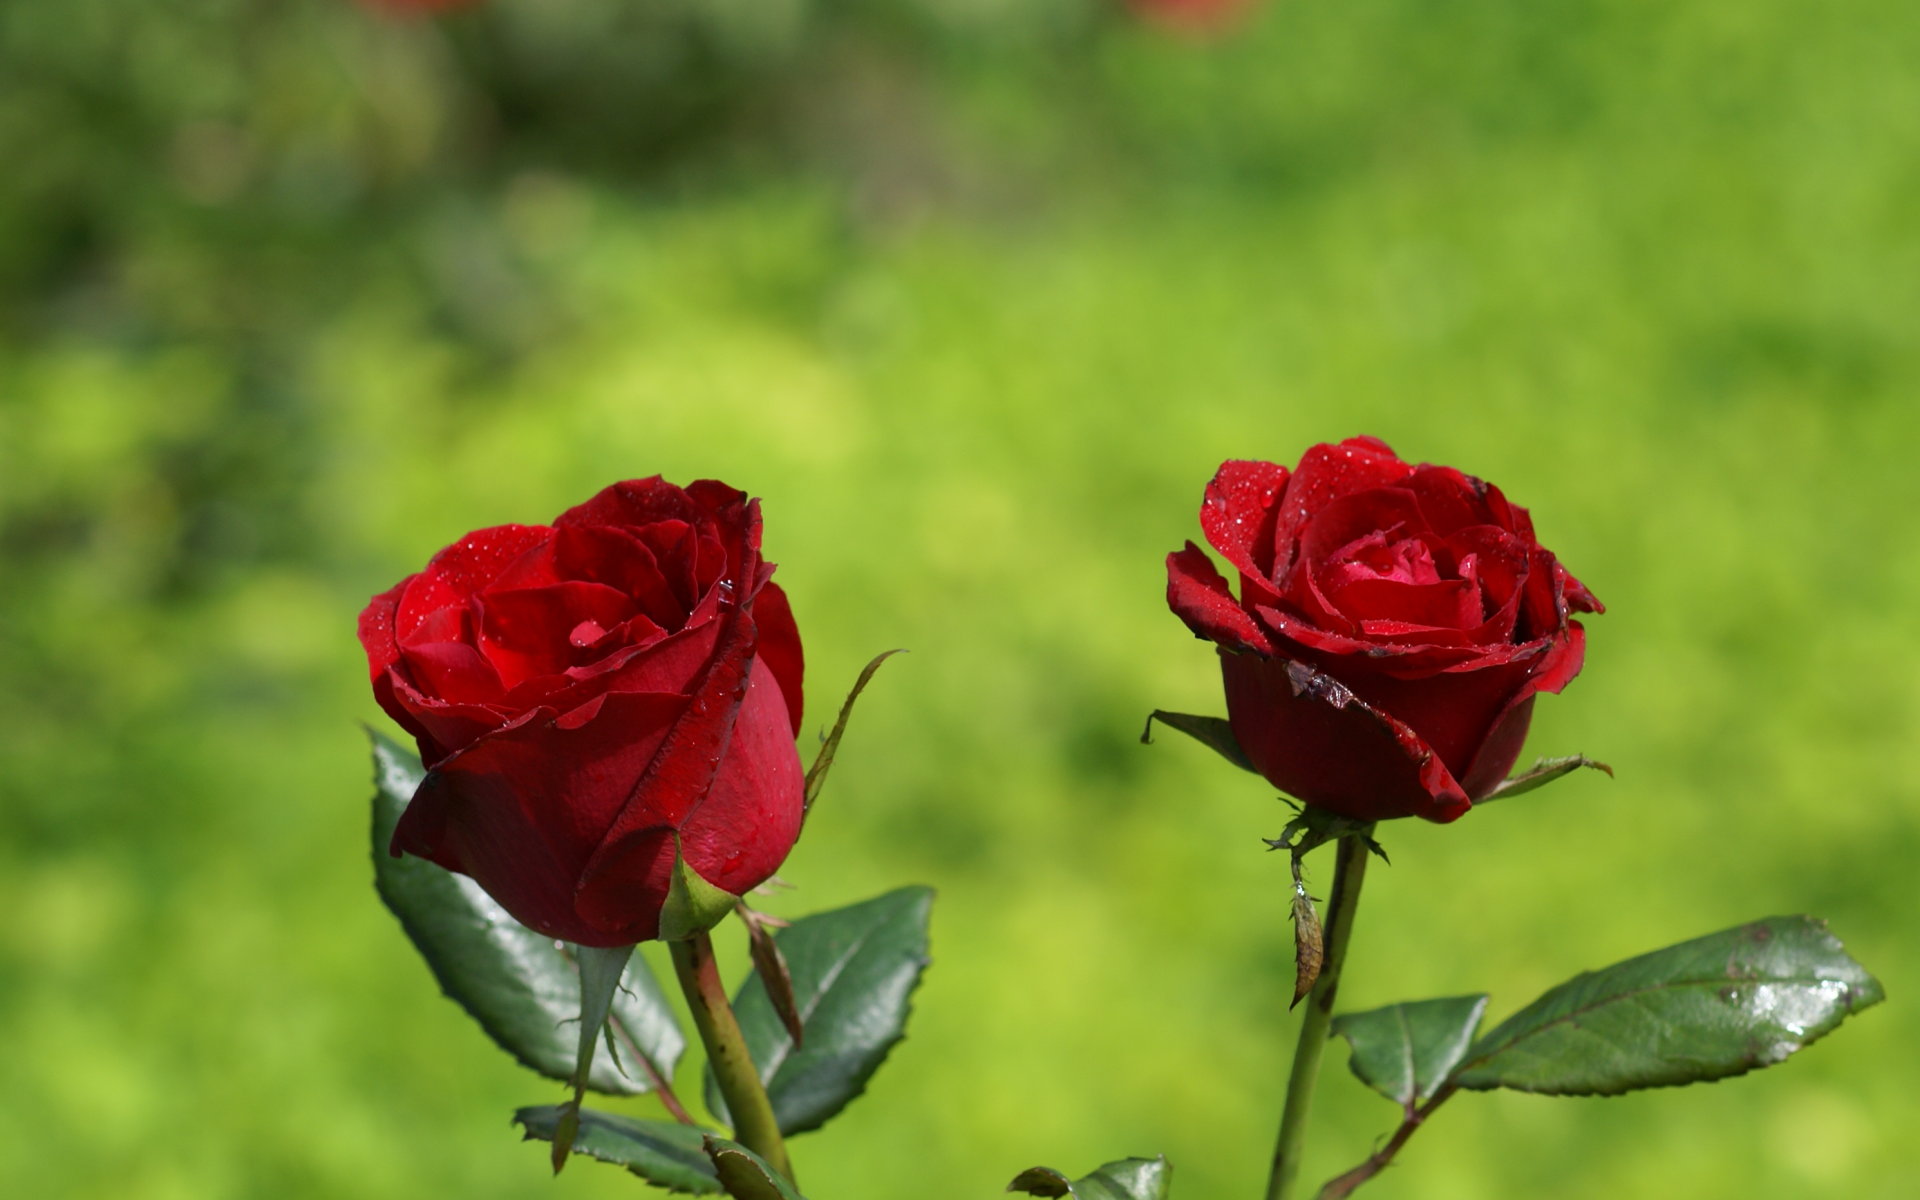 Pictures of Two Red Roses Flowers for Wallpaper - HD Wallpapers ...